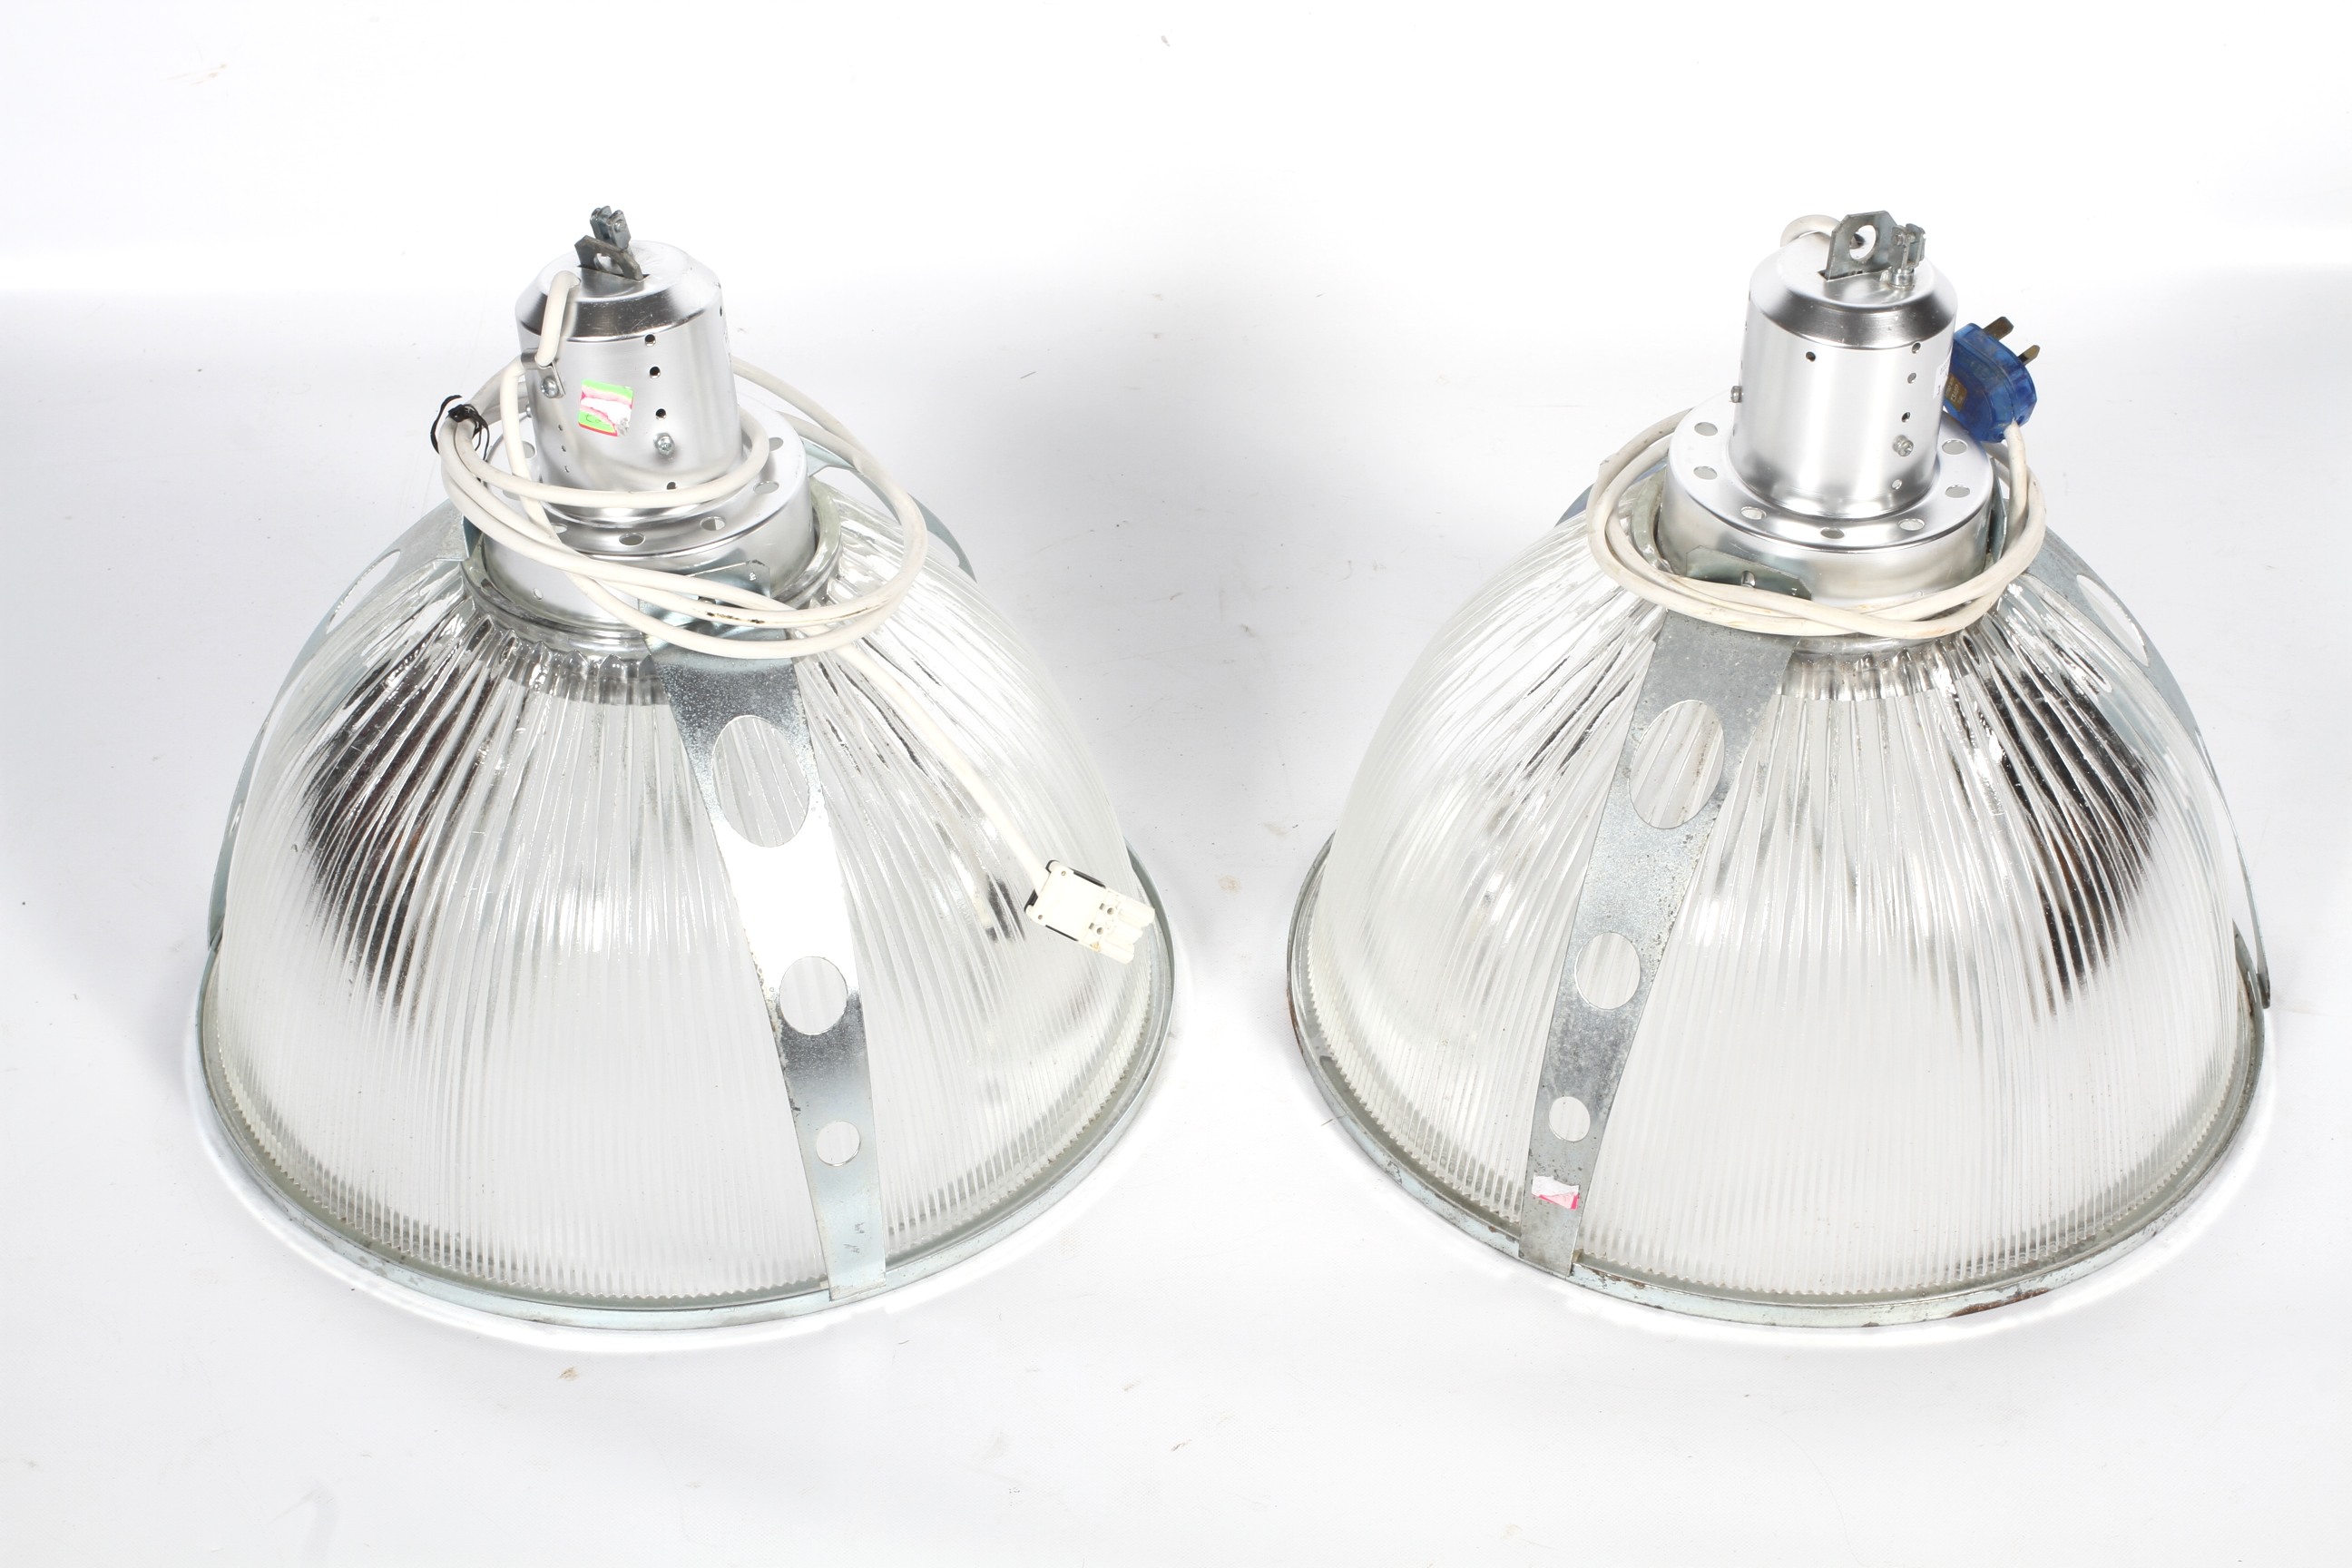 Two Holophane ribbed glass industrial style pendant lights with chromed fittings.